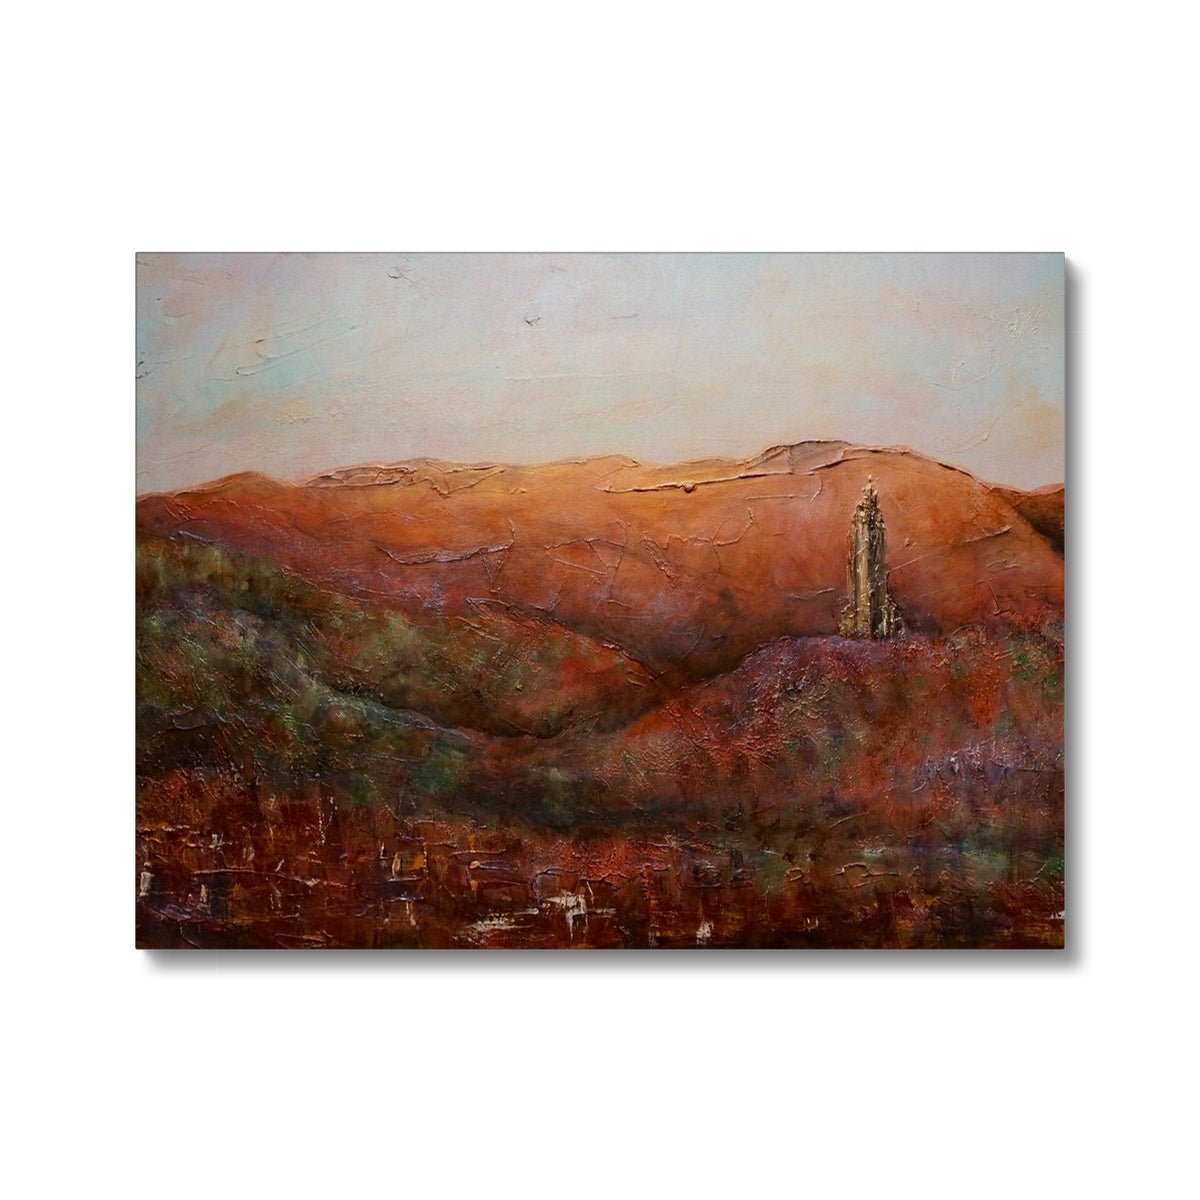 The Wallace Monument Painting | Canvas From Scotland-Contemporary Stretched Canvas Prints-Historic & Iconic Scotland Art Gallery-24"x18"-Paintings, Prints, Homeware, Art Gifts From Scotland By Scottish Artist Kevin Hunter